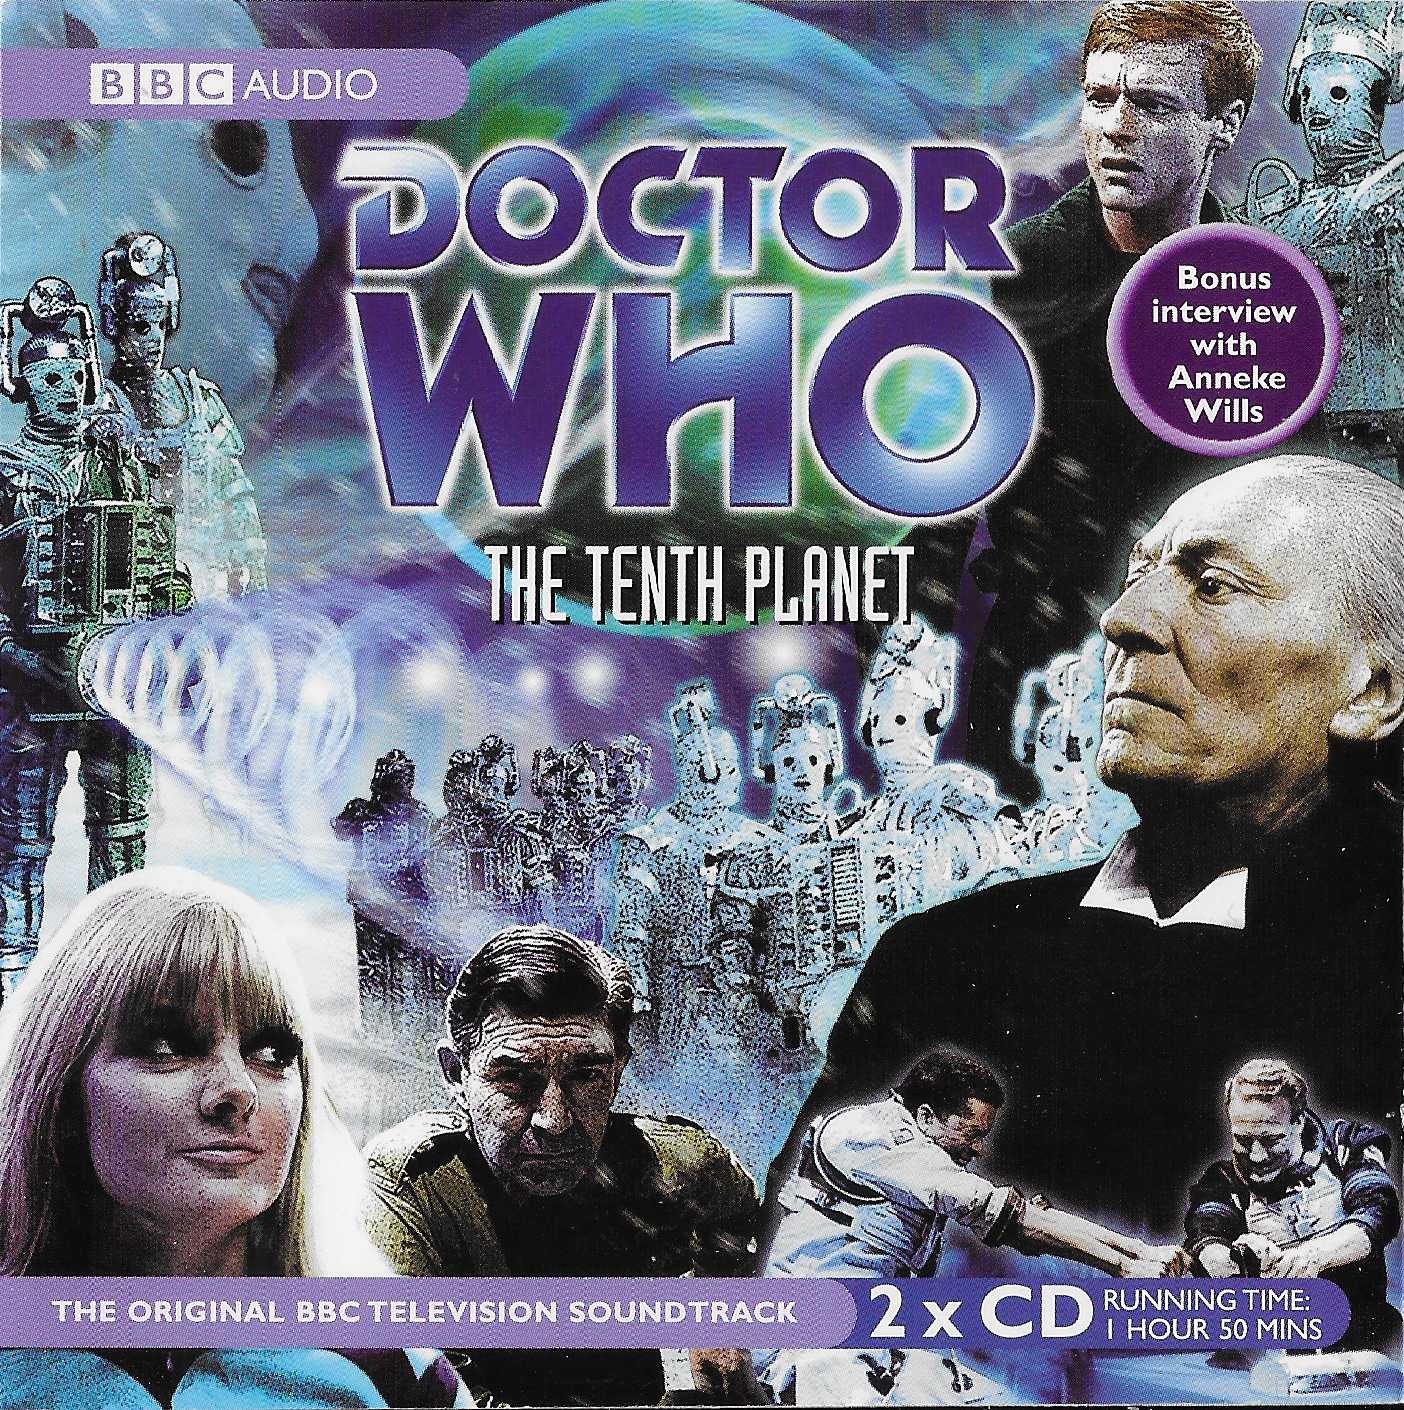 Picture of ISBN 0-563-52332-8 Doctor Who - The tenth planet by artist Kit Peddler / Gerry Davis from the BBC cds - Records and Tapes library